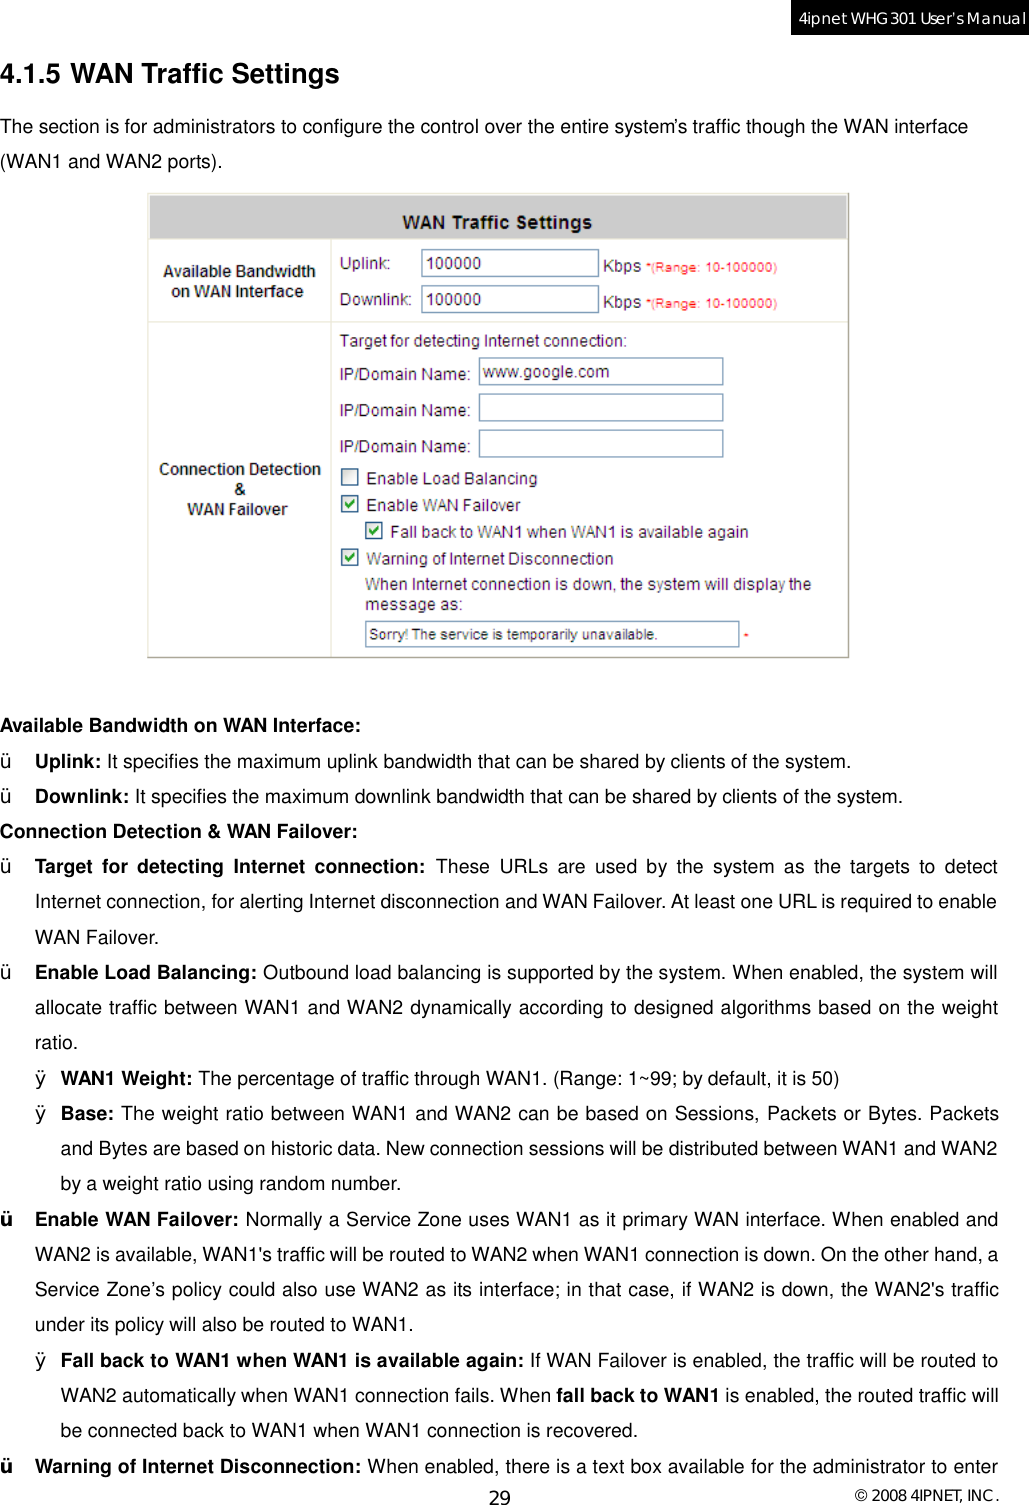  © 2008 4IPNET, INC. 29 4ipnet WHG301 User’s Manual  4.1.5 WAN Traffic Settings The section is for administrators to configure the control over the entire system’s traffic though the WAN interface (WAN1 and WAN2 ports).   Available Bandwidth on WAN Interface: Ÿ  Uplink: It specifies the maximum uplink bandwidth that can be shared by clients of the system. Ÿ  Downlink: It specifies the maximum downlink bandwidth that can be shared by clients of the system. Connection Detection &amp; WAN Failover: Ÿ  Target for detecting Internet connection: These URLs are used by the system as the targets to detect Internet connection, for alerting Internet disconnection and WAN Failover. At least one URL is required to enable WAN Failover. Ÿ  Enable Load Balancing: Outbound load balancing is supported by the system. When enabled, the system will allocate traffic between WAN1 and WAN2 dynamically according to designed algorithms based on the weight ratio. Ø WAN1 Weight: The percentage of traffic through WAN1. (Range: 1~99; by default, it is 50) Ø Base: The weight ratio between WAN1 and WAN2 can be based on Sessions, Packets or Bytes. Packets and Bytes are based on historic data. New connection sessions will be distributed between WAN1 and WAN2 by a weight ratio using random number. Ÿ  Enable WAN Failover: Normally a Service Zone uses WAN1 as it primary WAN interface. When enabled and WAN2 is available, WAN1&apos;s traffic will be routed to WAN2 when WAN1 connection is down. On the other hand, a Service Zone’s policy could also use WAN2 as its interface; in that case, if WAN2 is down, the WAN2&apos;s traffic under its policy will also be routed to WAN1. Ø Fall back to WAN1 when WAN1 is available again: If WAN Failover is enabled, the traffic will be routed to WAN2 automatically when WAN1 connection fails. When fall back to WAN1 is enabled, the routed traffic will be connected back to WAN1 when WAN1 connection is recovered. Ÿ  Warning of Internet Disconnection: When enabled, there is a text box available for the administrator to enter 